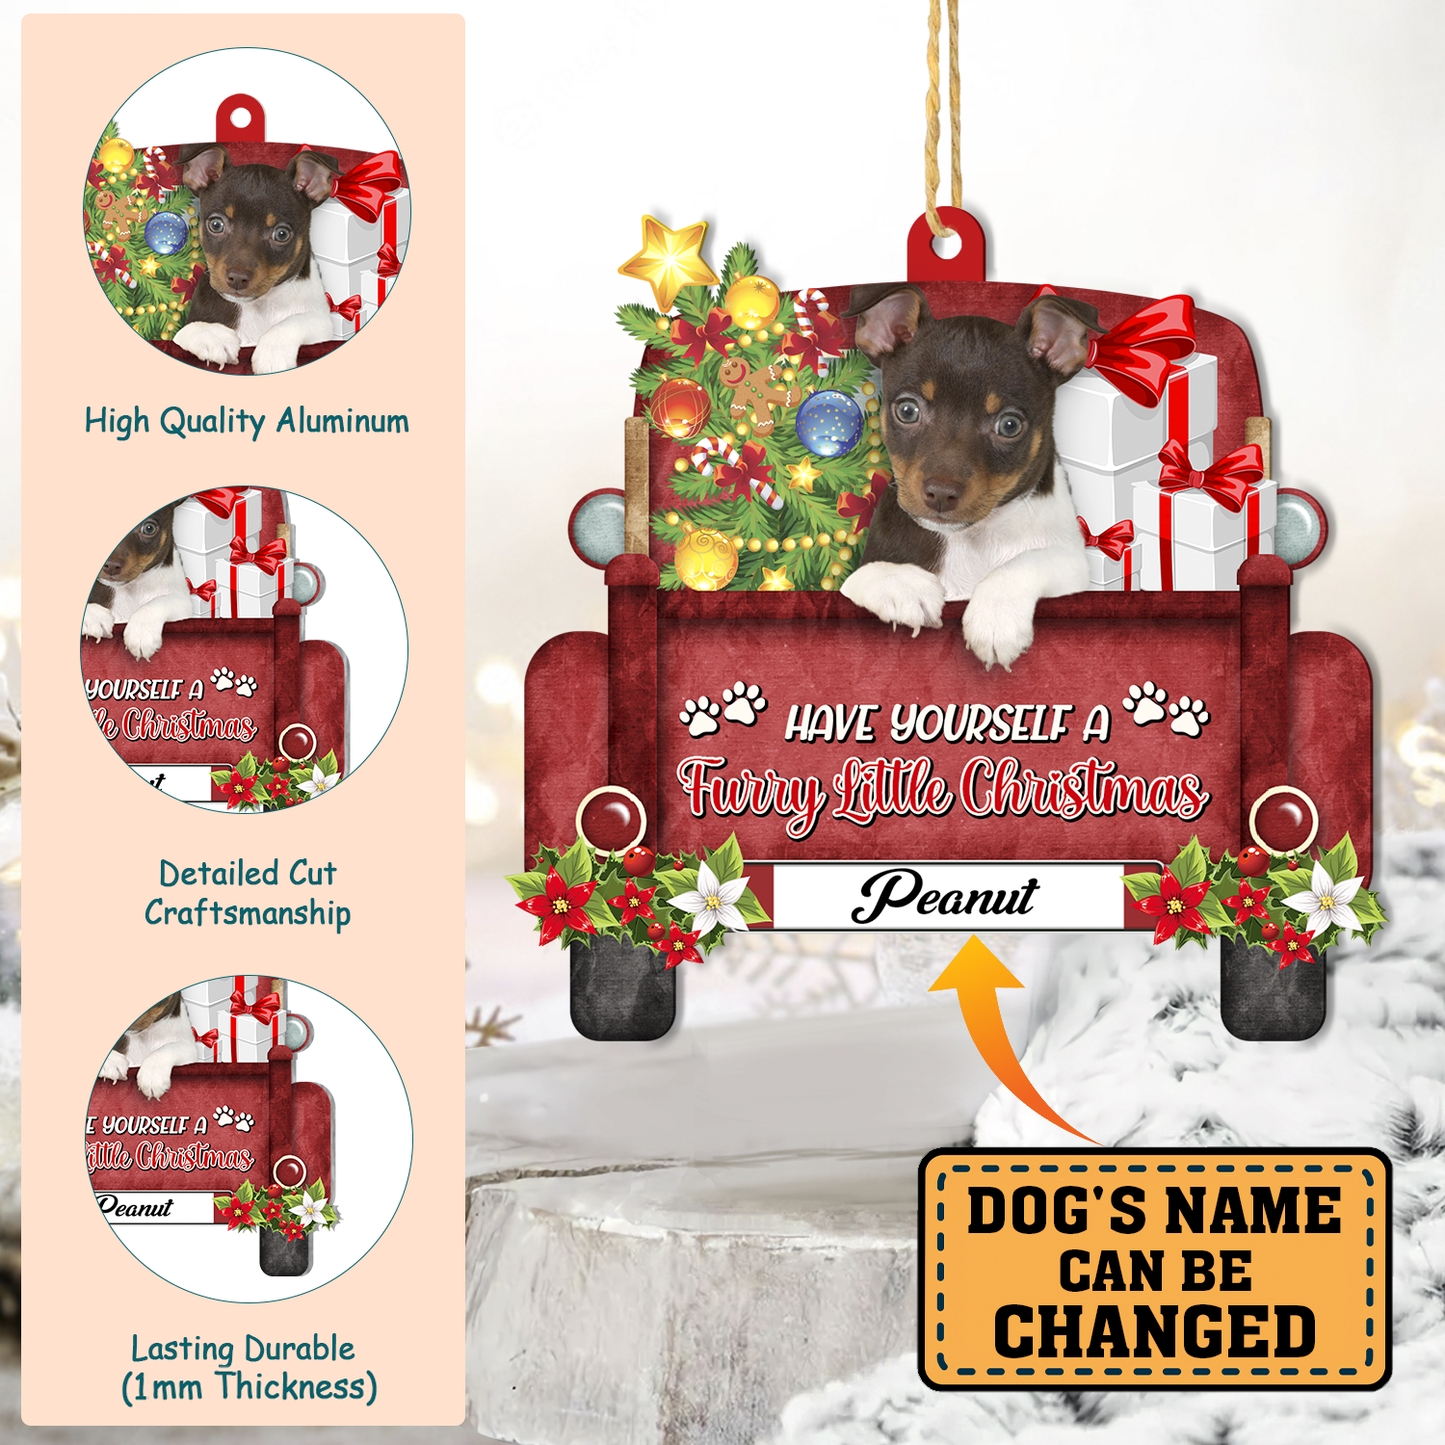 Personalized Rat Terrier Red Truck Christmas Aluminum Ornament